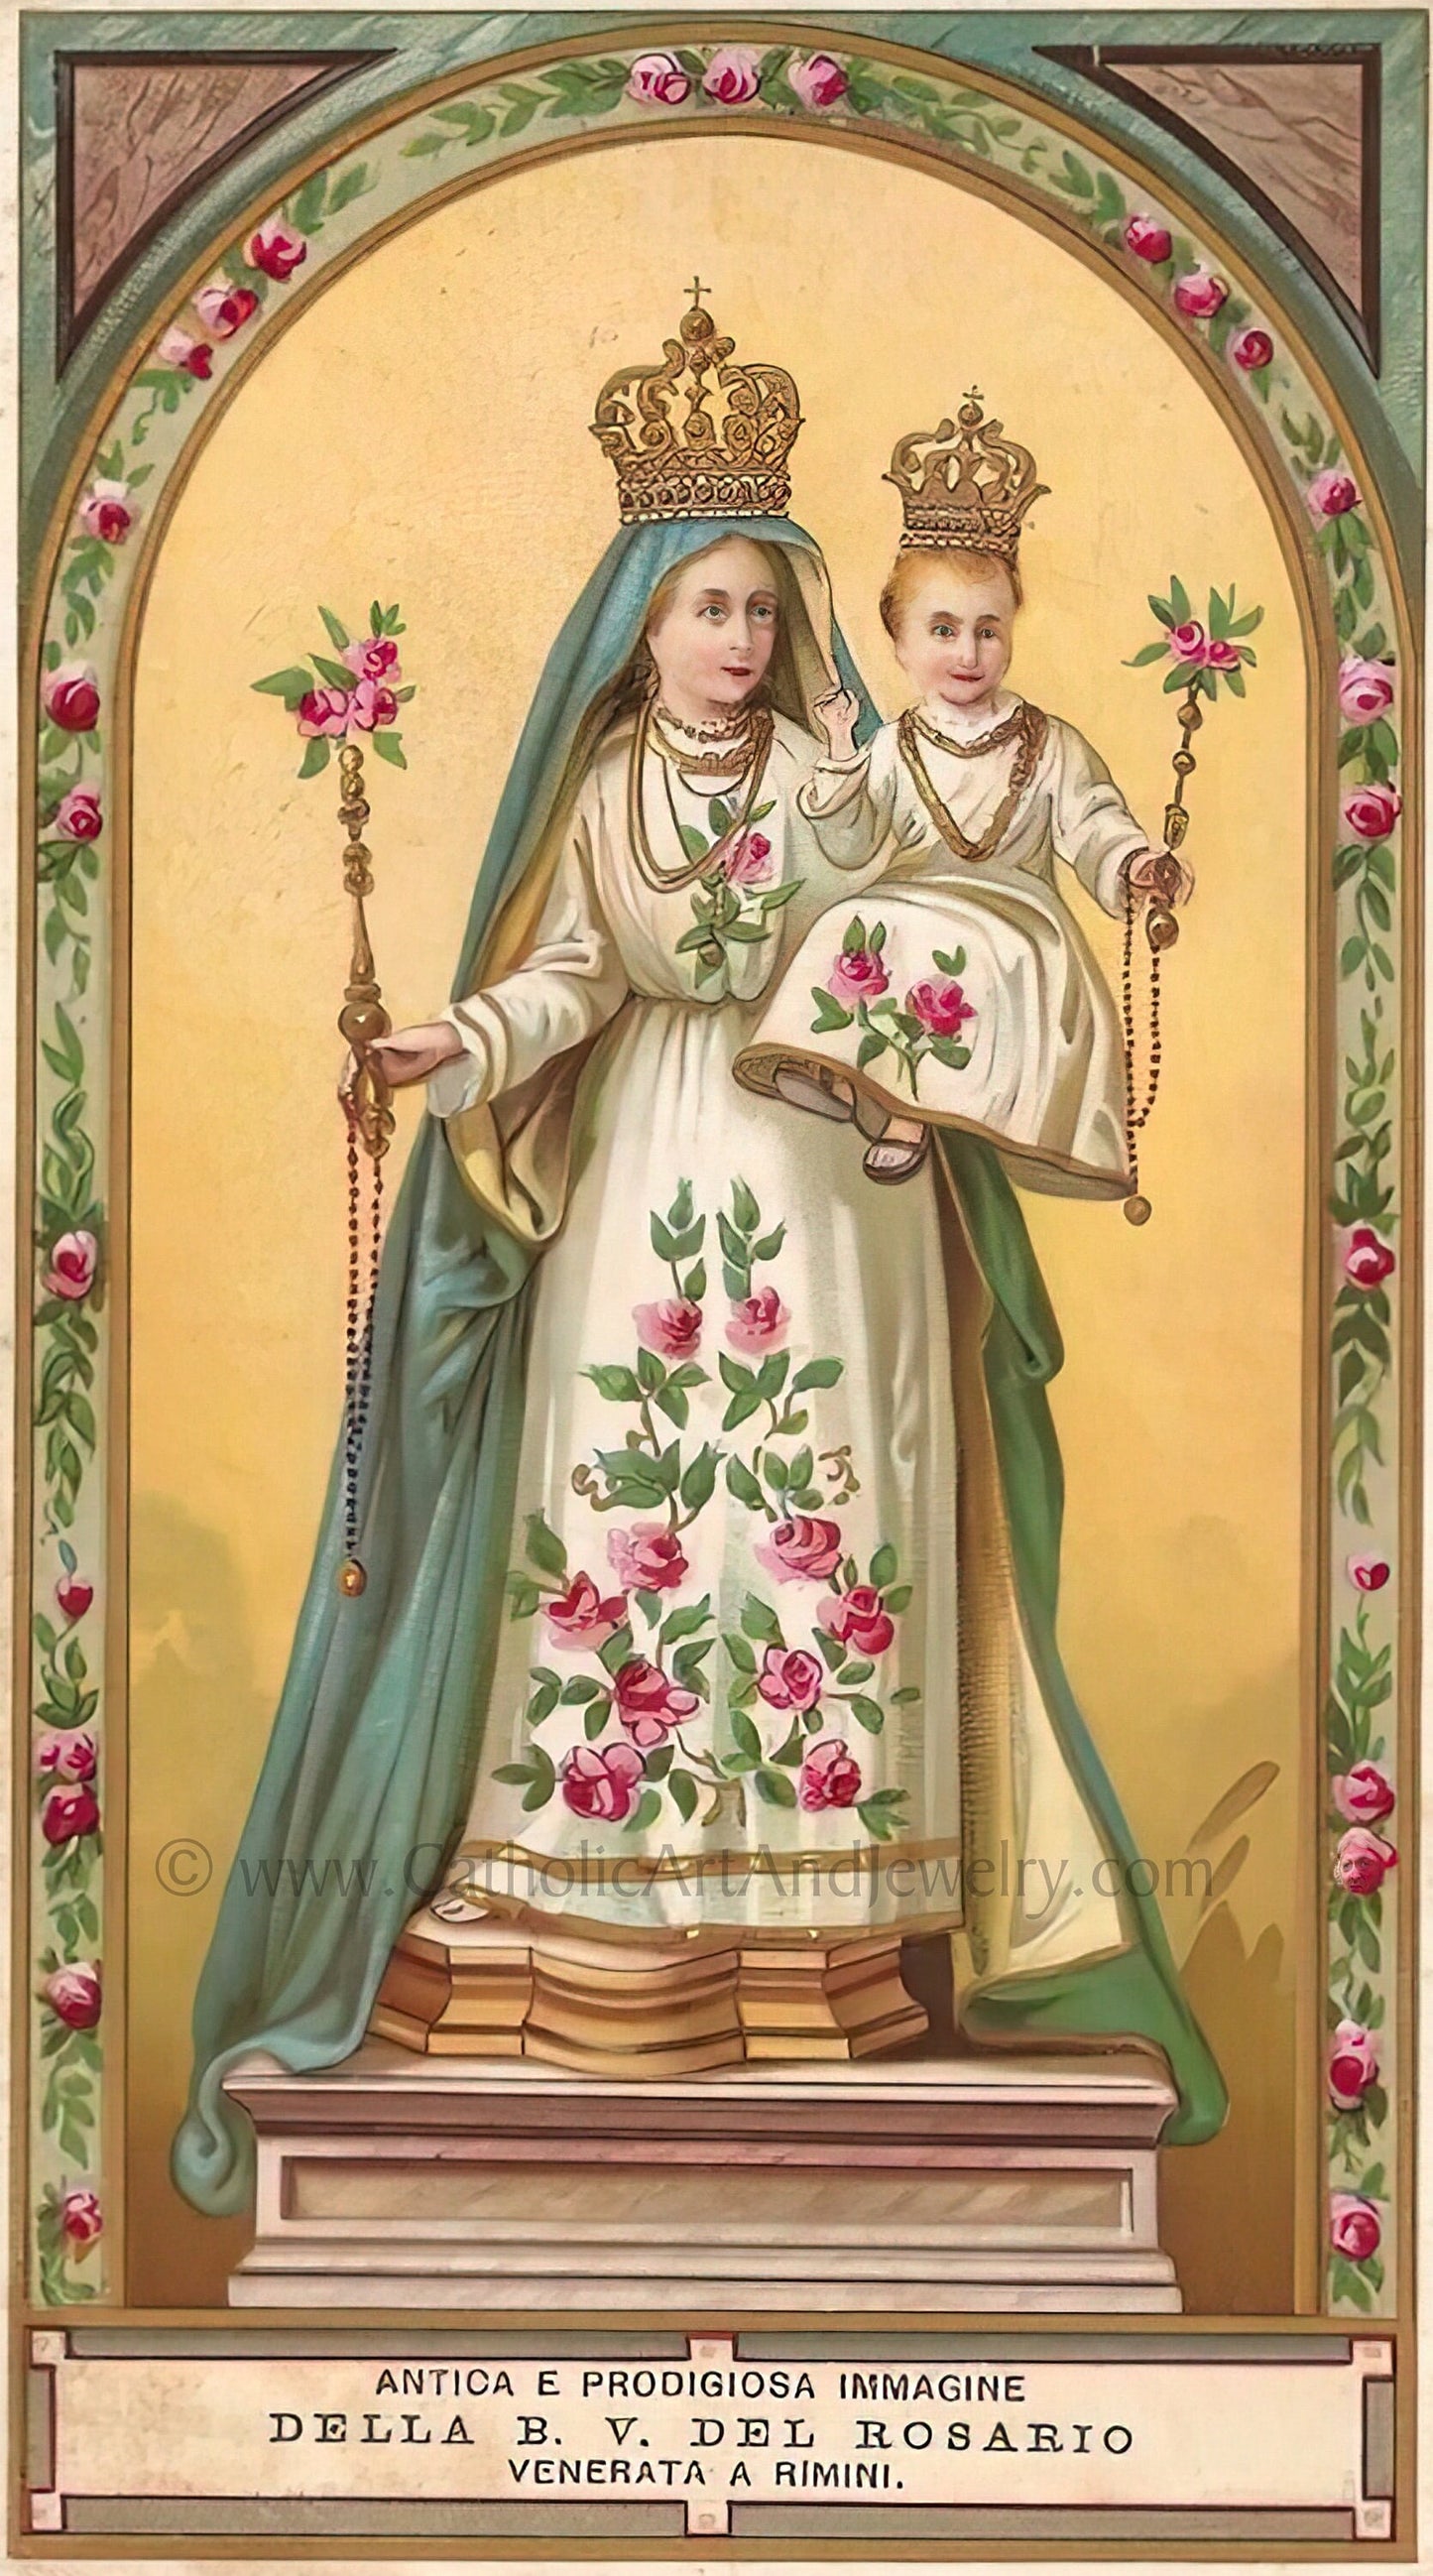 Our Lady of the Rosary – based on a Vintage Italian Holy Card – Catholic Art Print